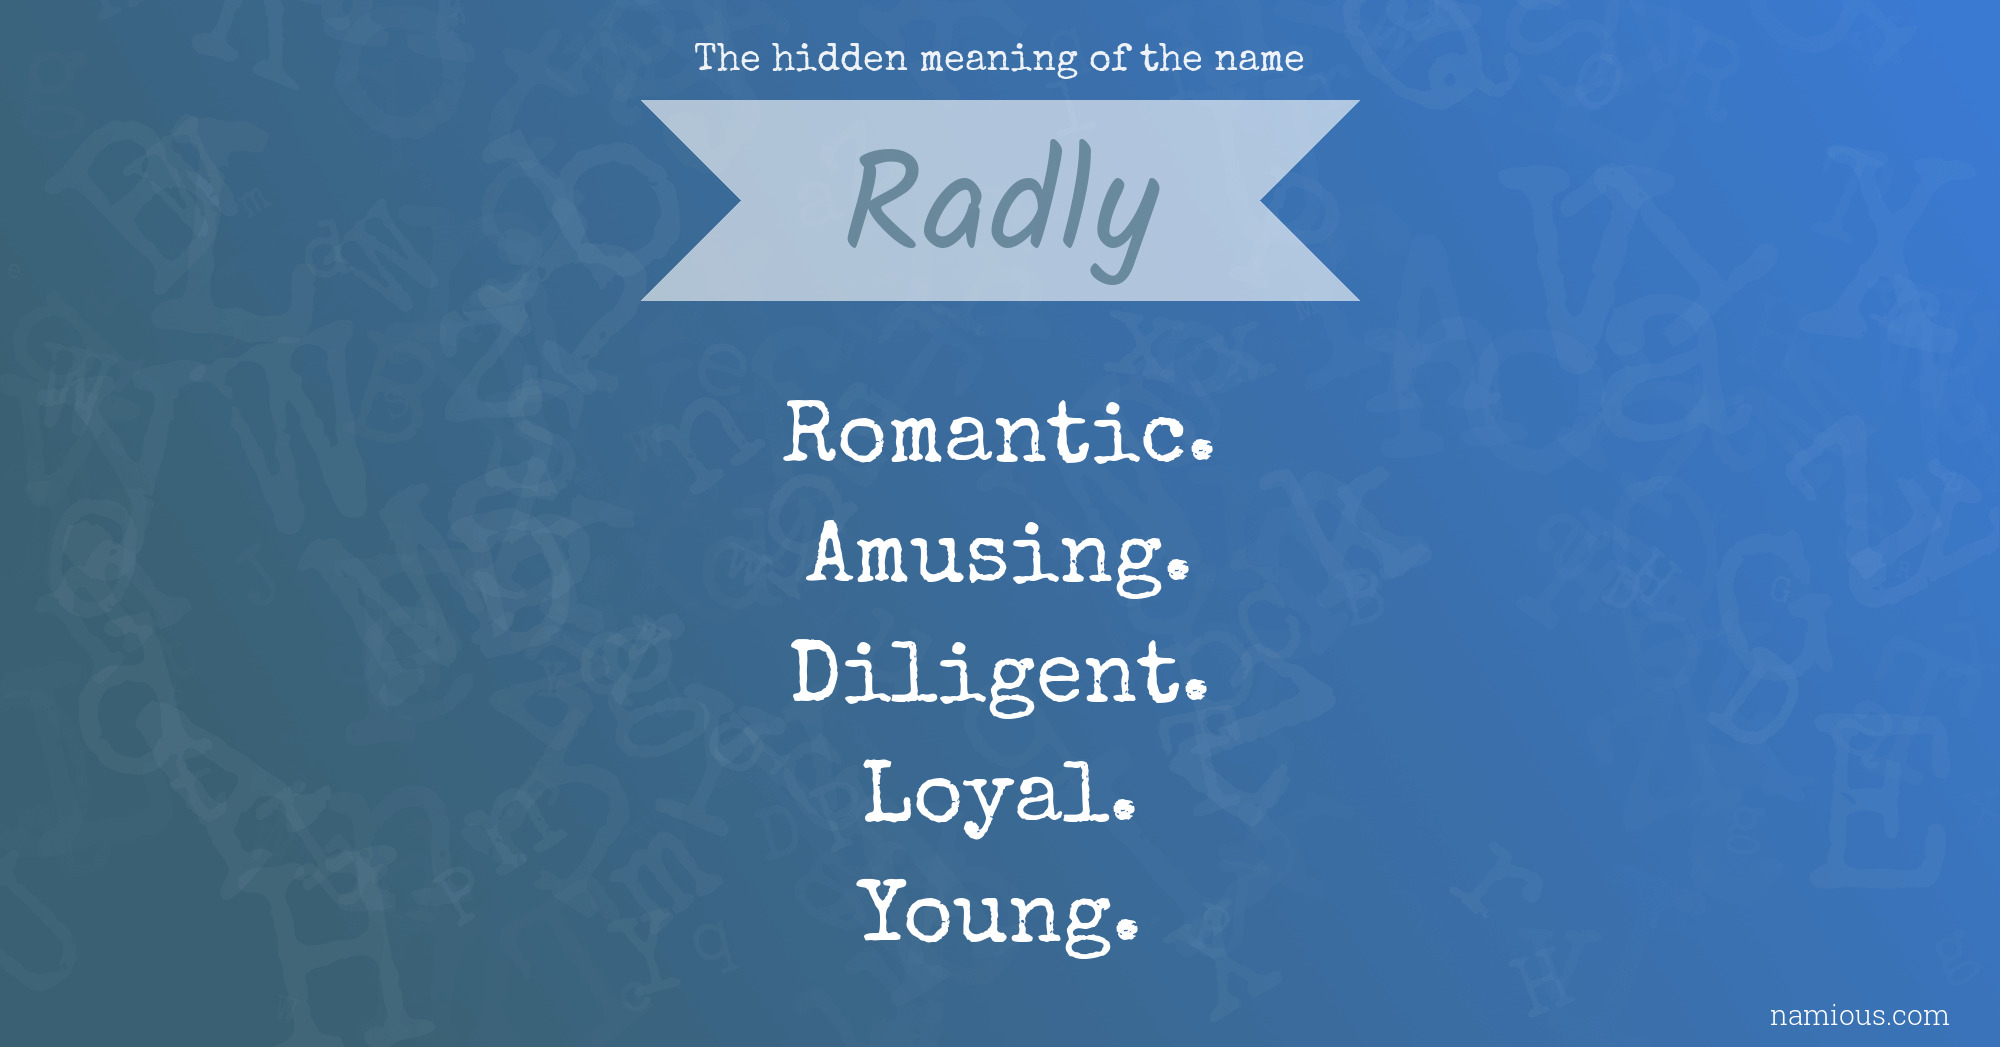 The hidden meaning of the name Radly